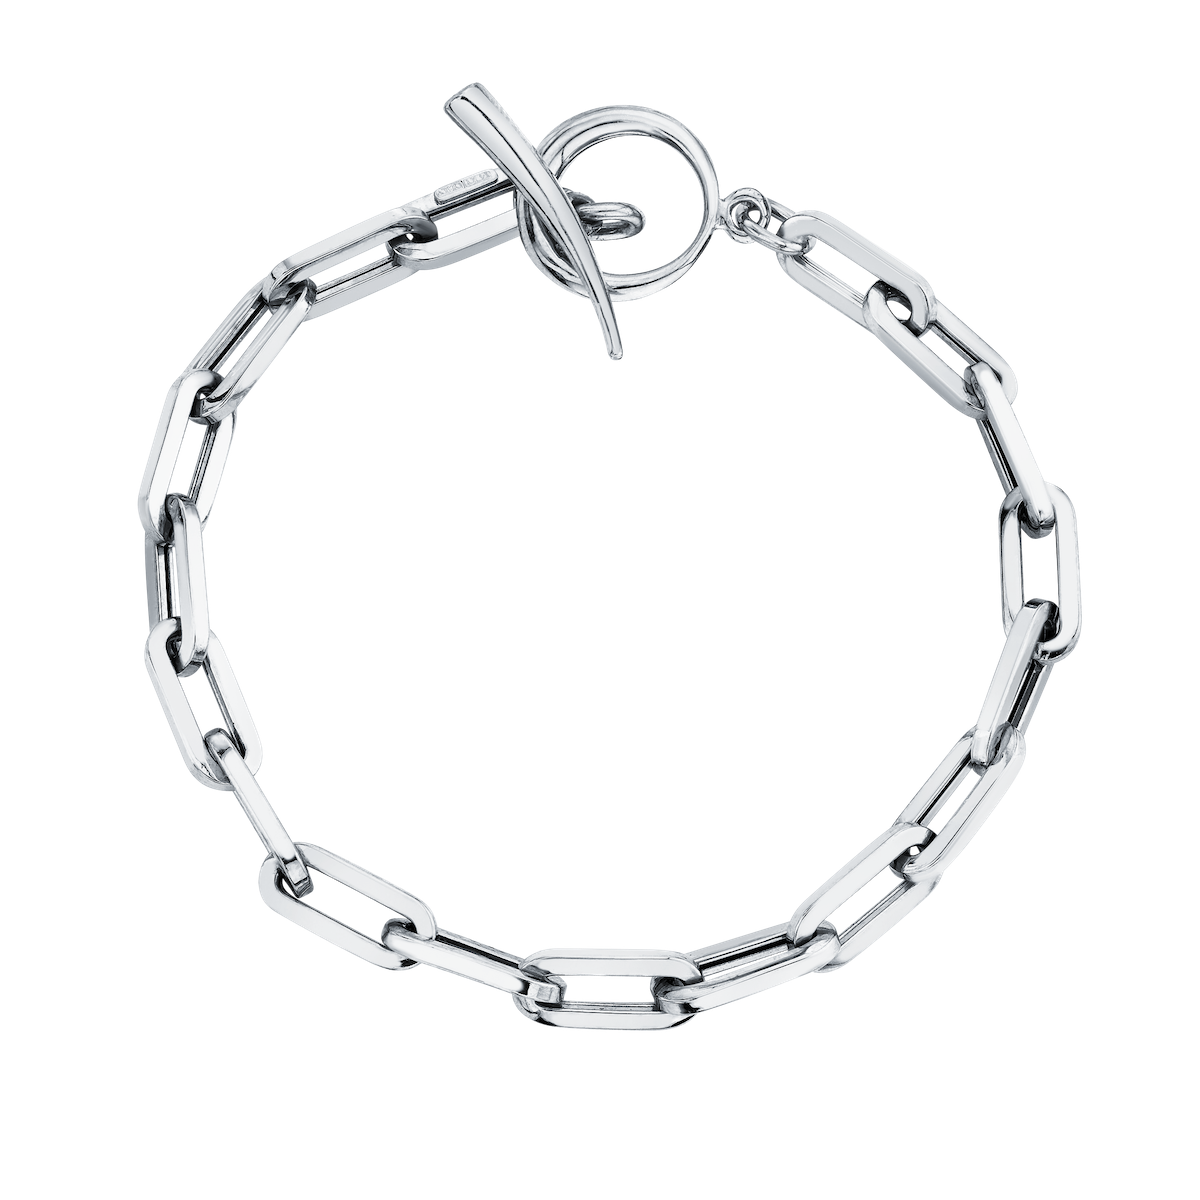 Rectangular Link Chain Bracelet with Tusk Clasp